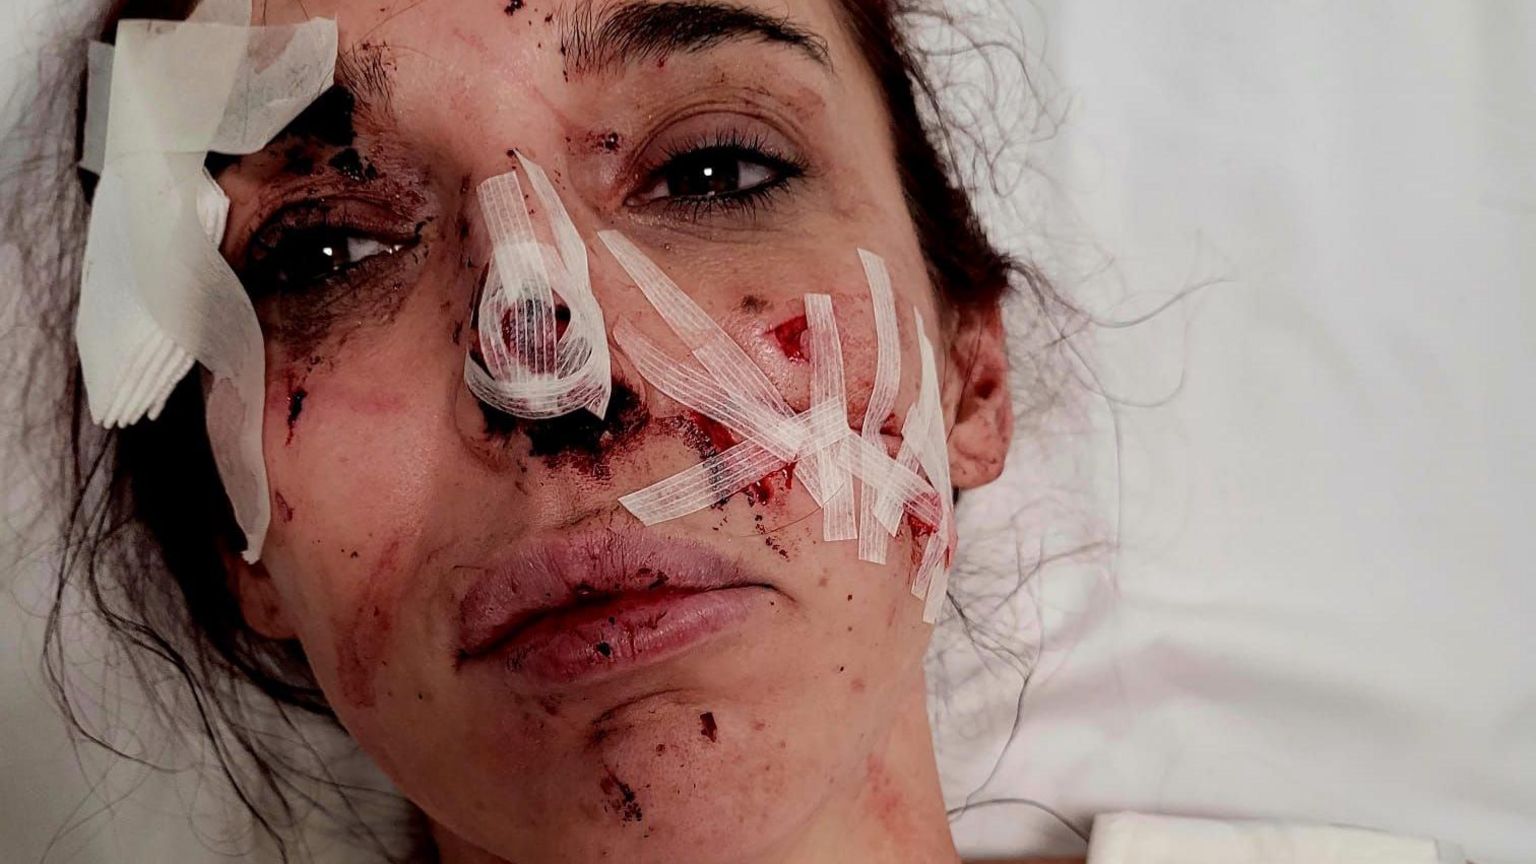 Natalie Arthurs with facial injuries after glass attack